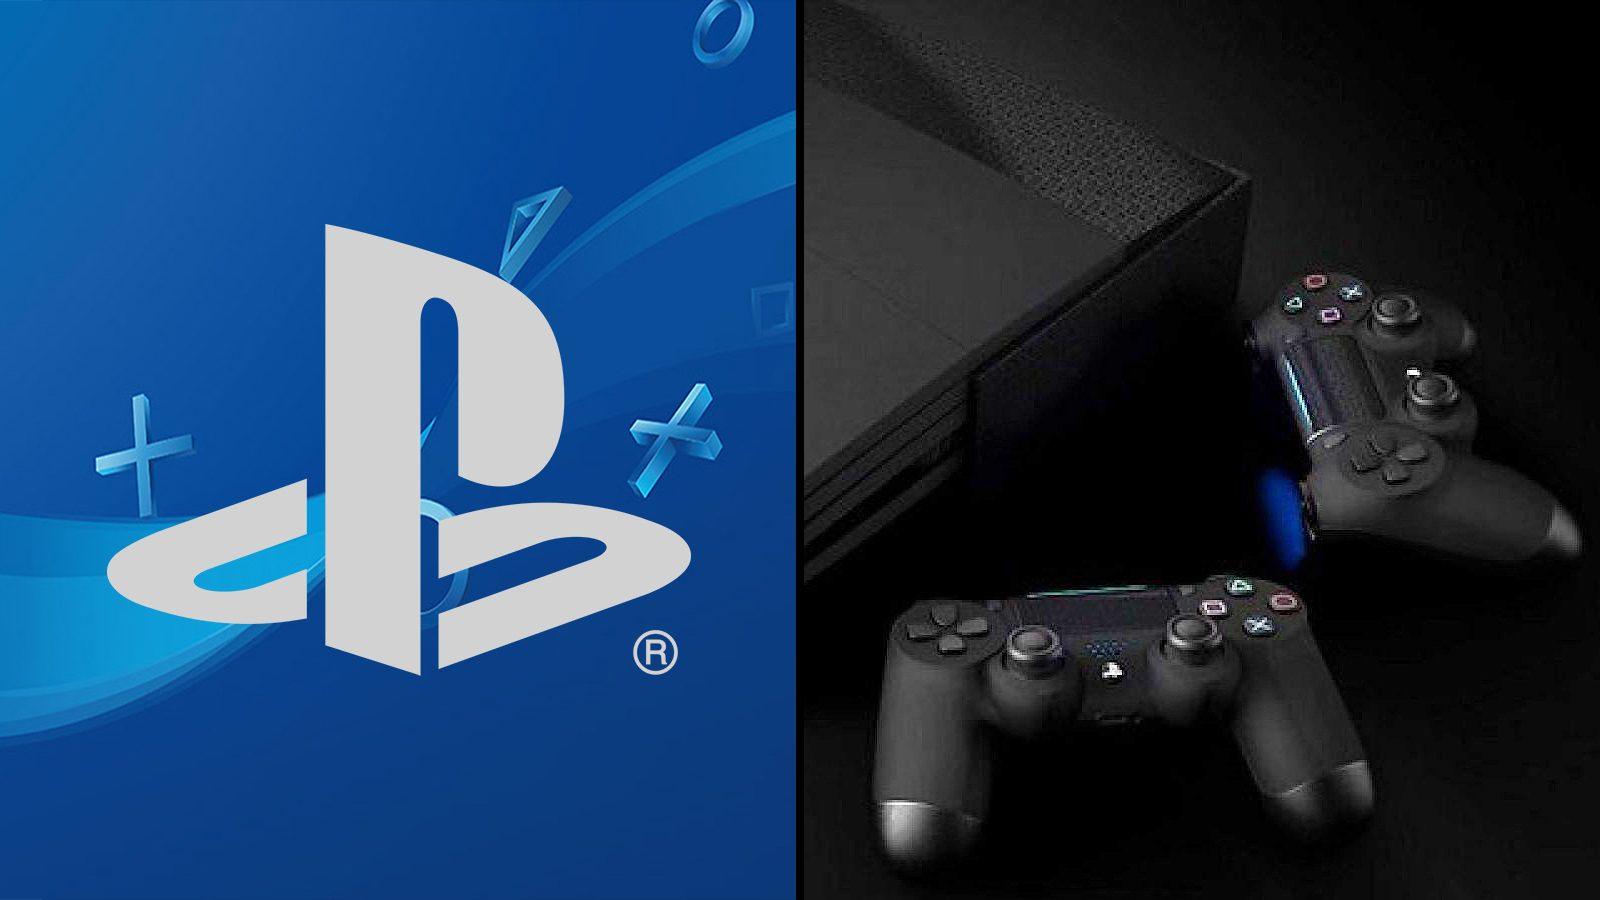 An insider has revealed technical details of the PlayStation 5 Pro